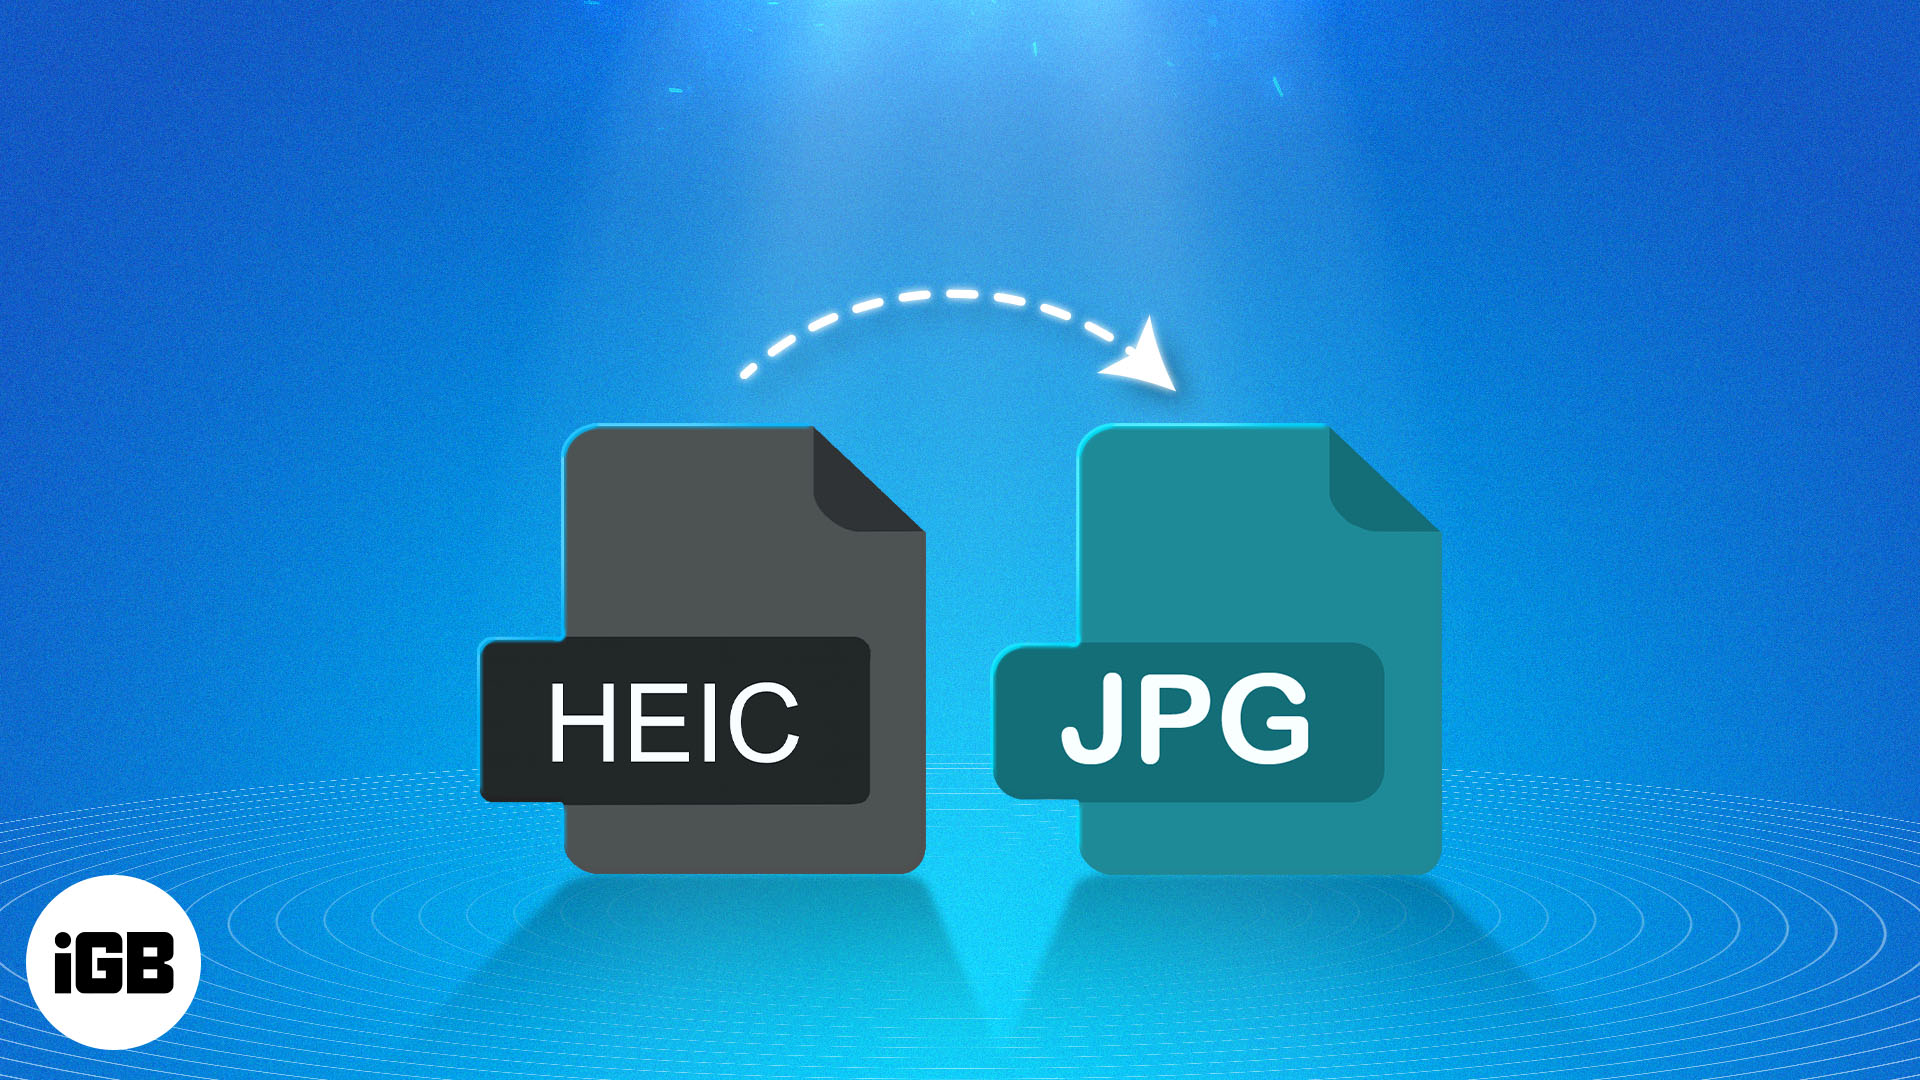 How to convert HEIC to JPG on iPhone, Mac, and Windows